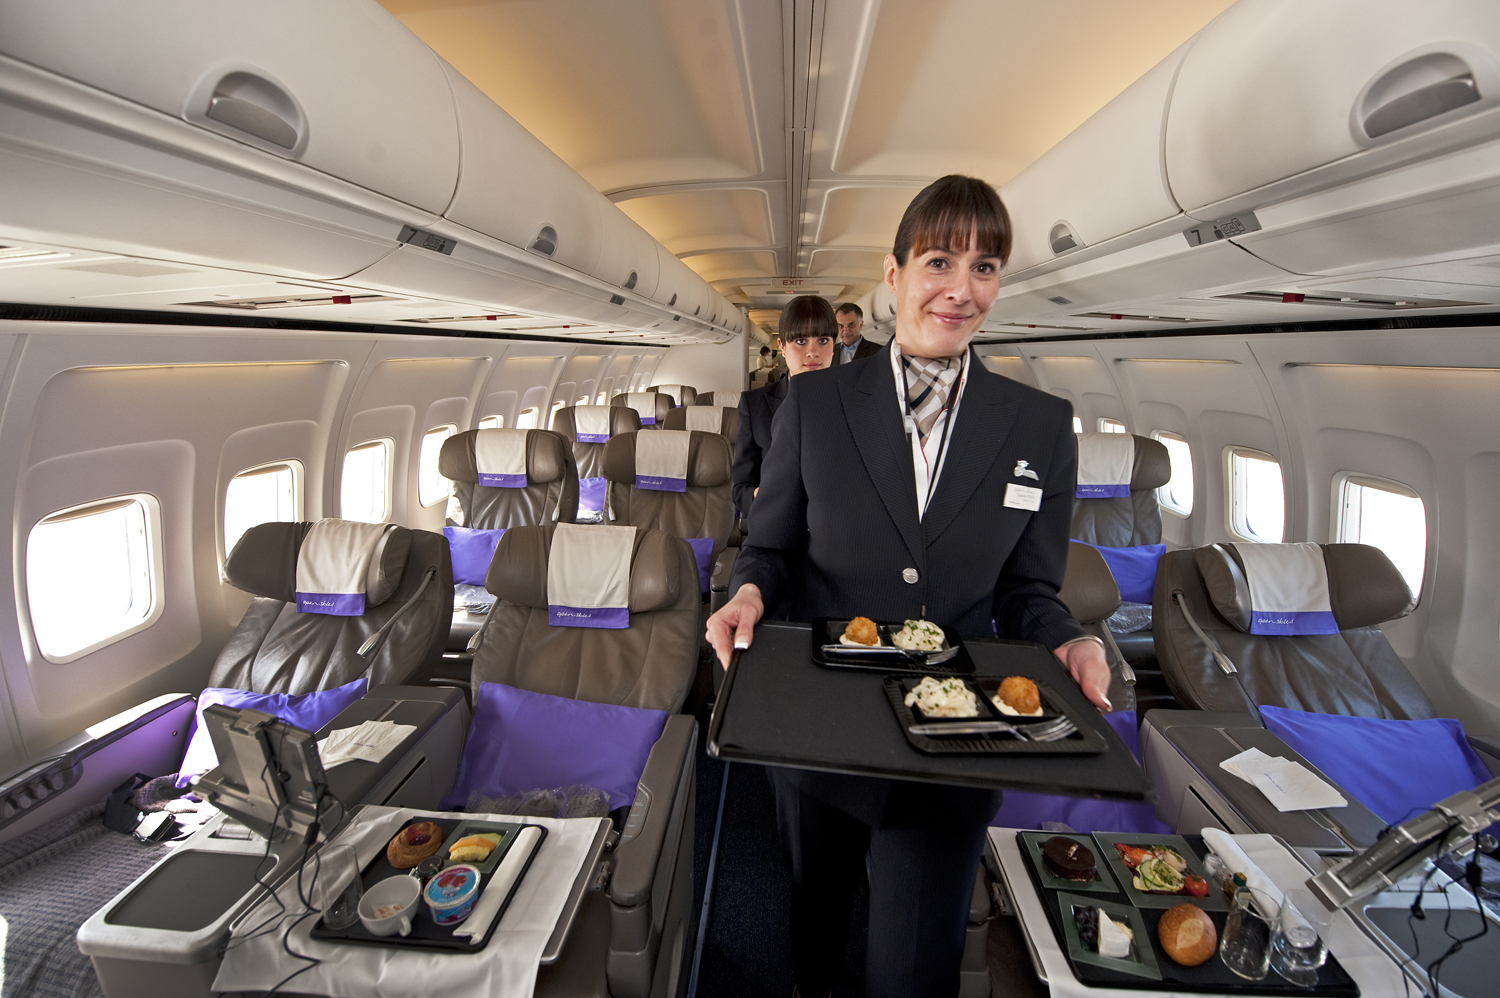 A flight attendant for the new airline Open Skies, a 100 percent business class airline with authentic French cuisine, poses on March 24, 2010 at Washington-Dulles International airport in Virginia. The upscale airline travels from New York and Washington, DC to Paris. AFP Photo/Paul J. Richards (Photo credit should read PAUL J. RICHARDS/AFP/Getty Images)